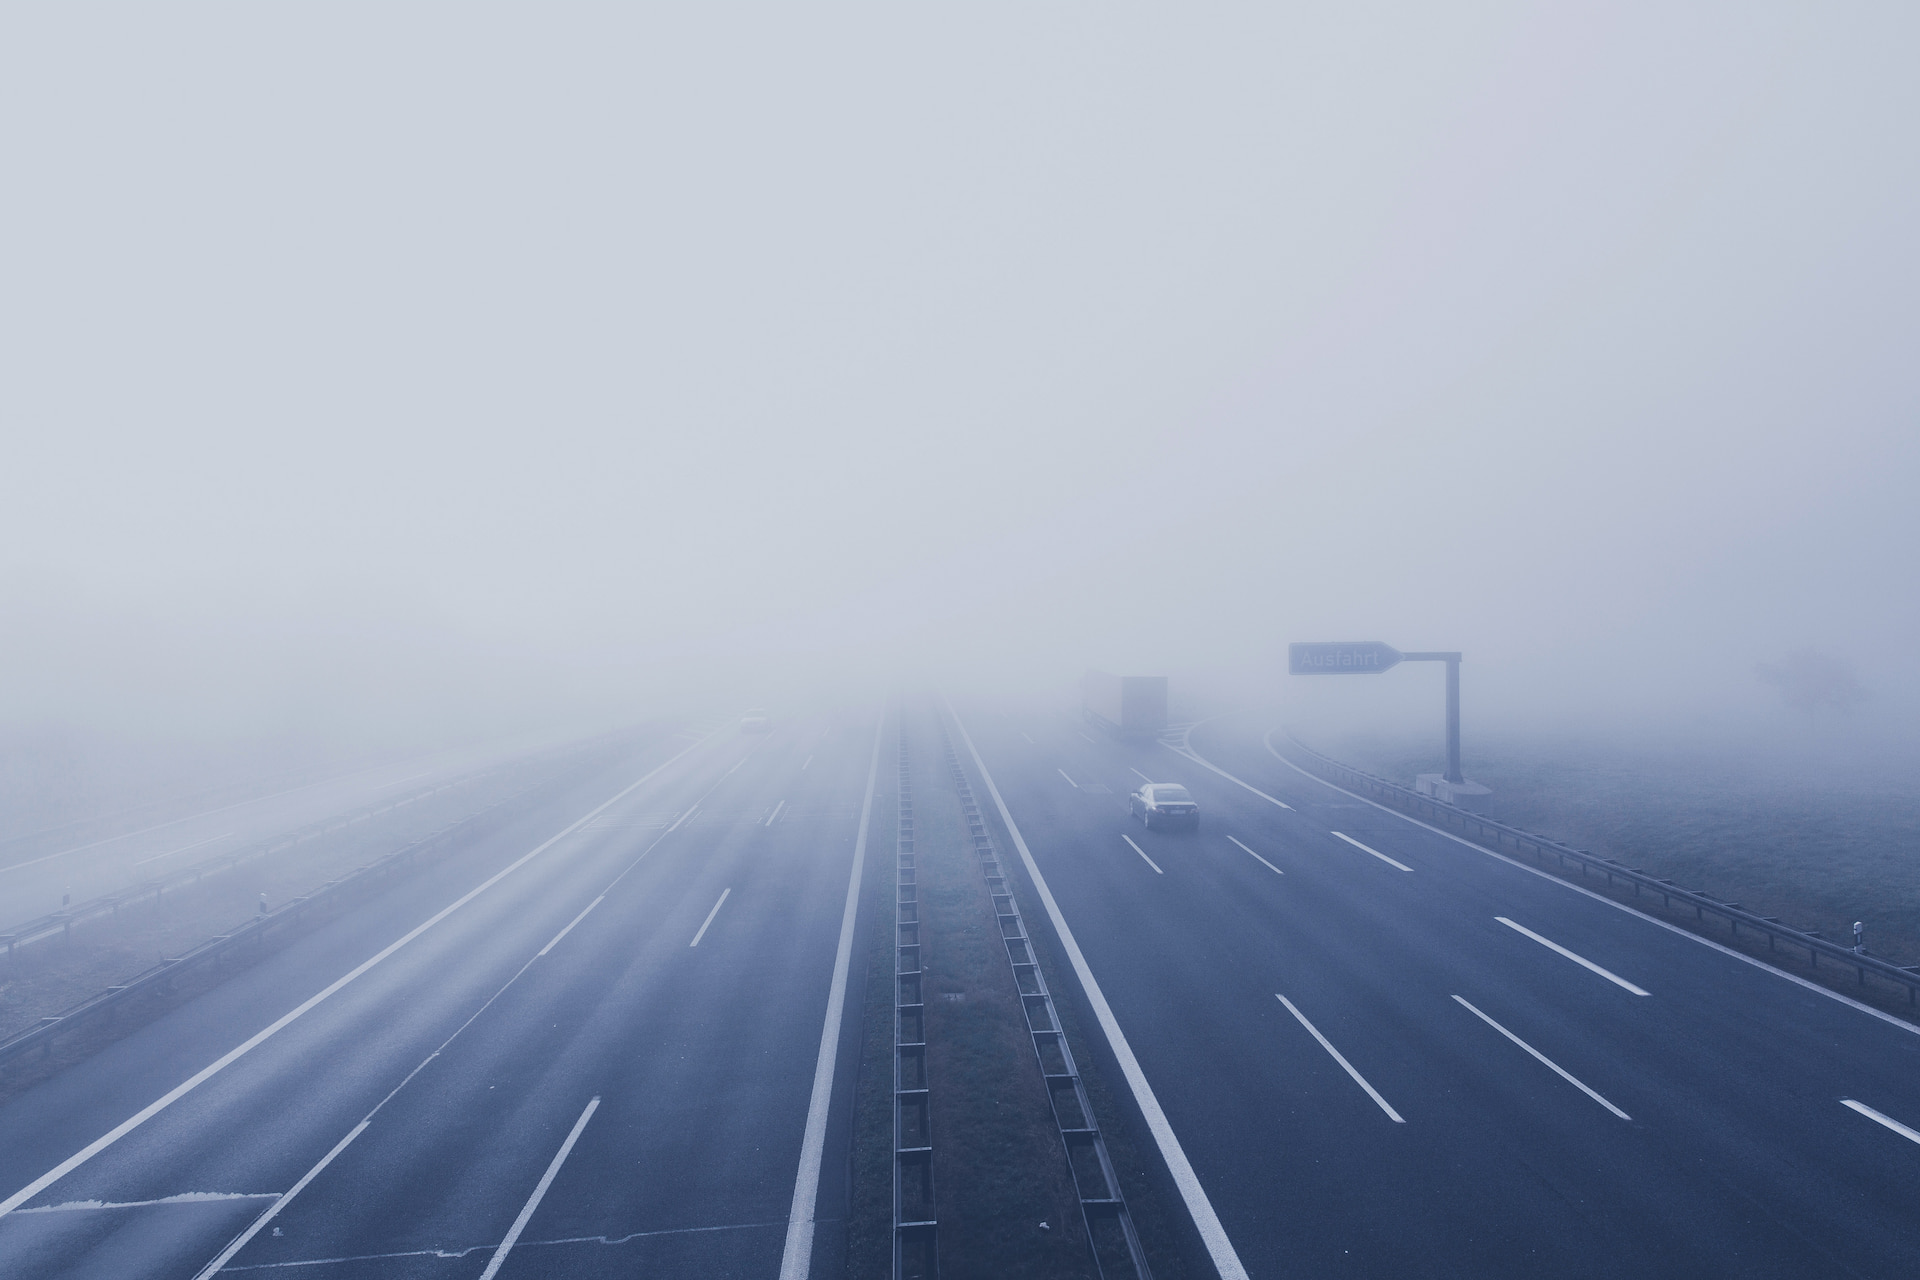 Vehicles driving on a foggy highway